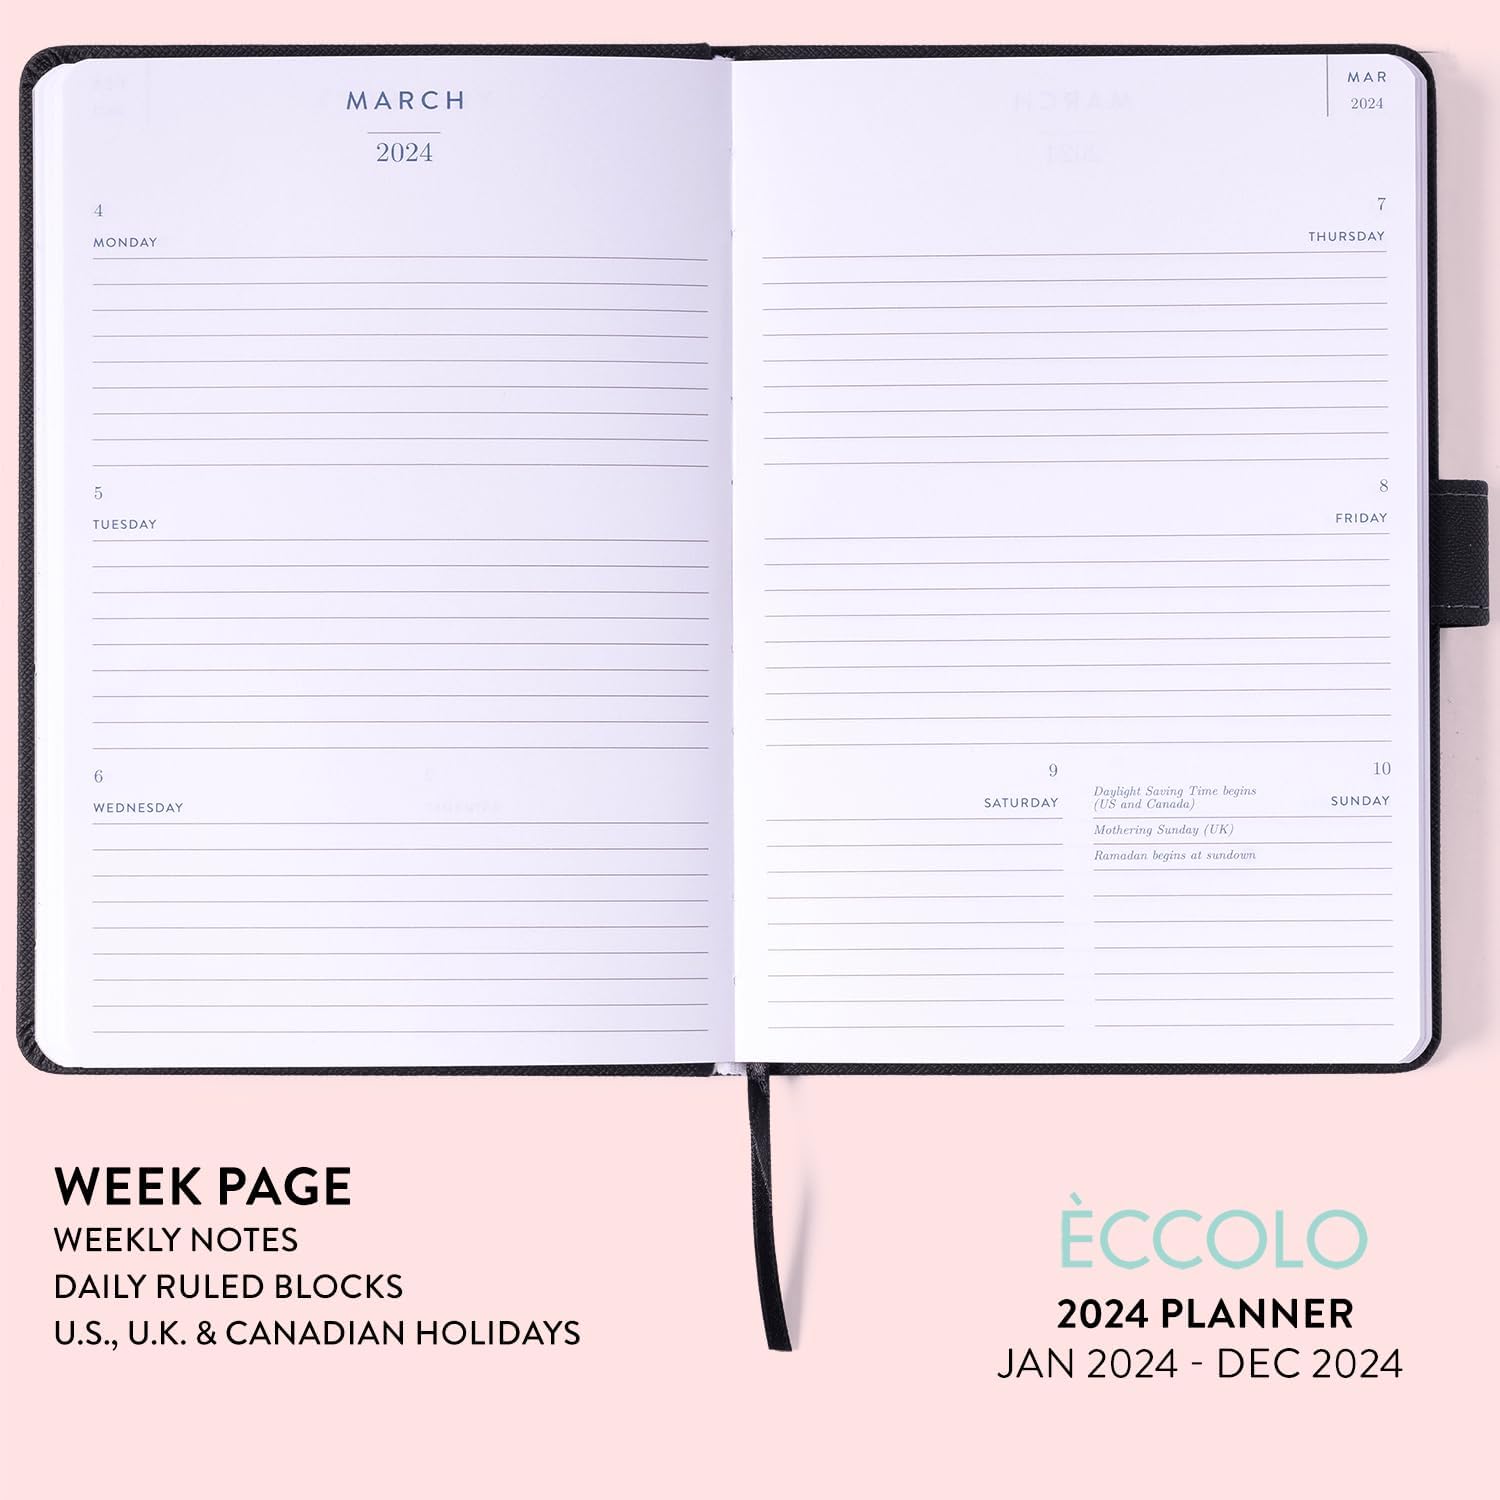 2024 Black with Tab Closure 6x8 Bound Planner